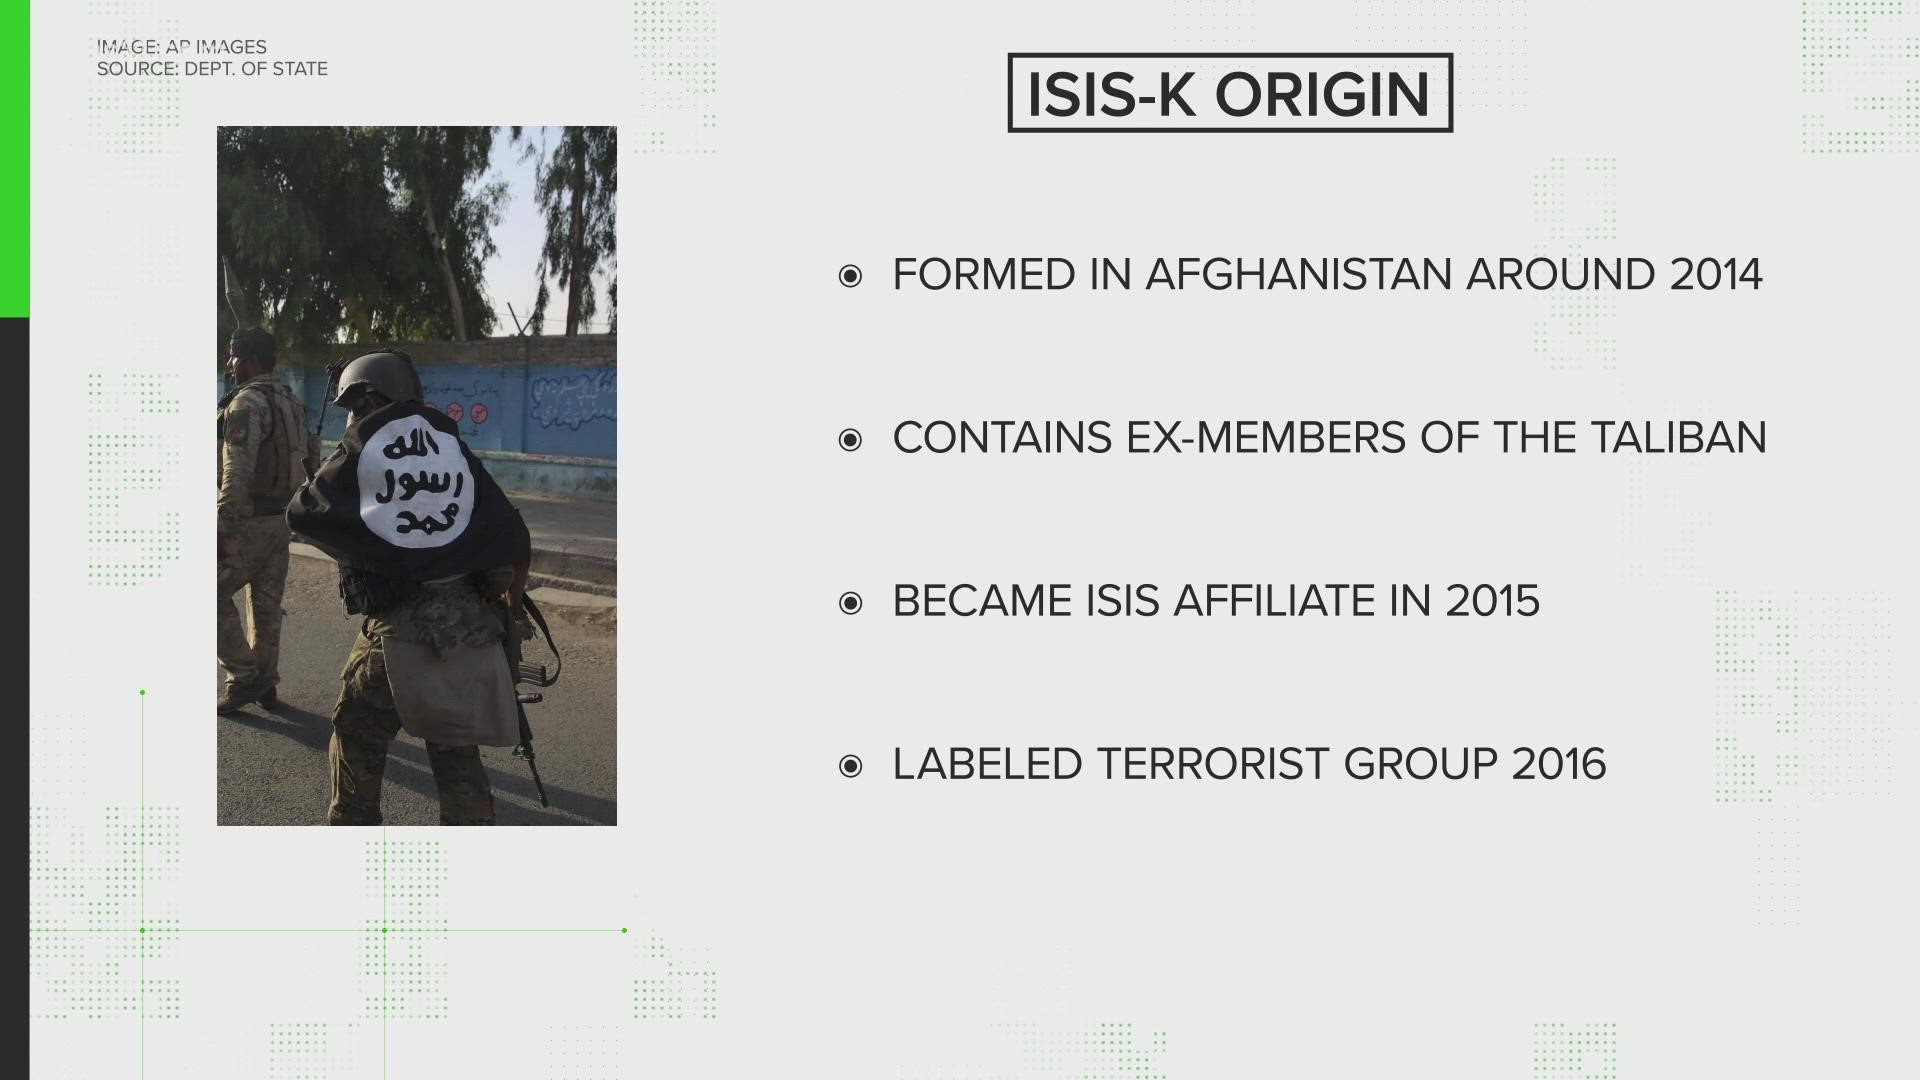 The terrorist organization operates in the area of Afghanistan, Pakistan, and Iran it calls "Khorasan."